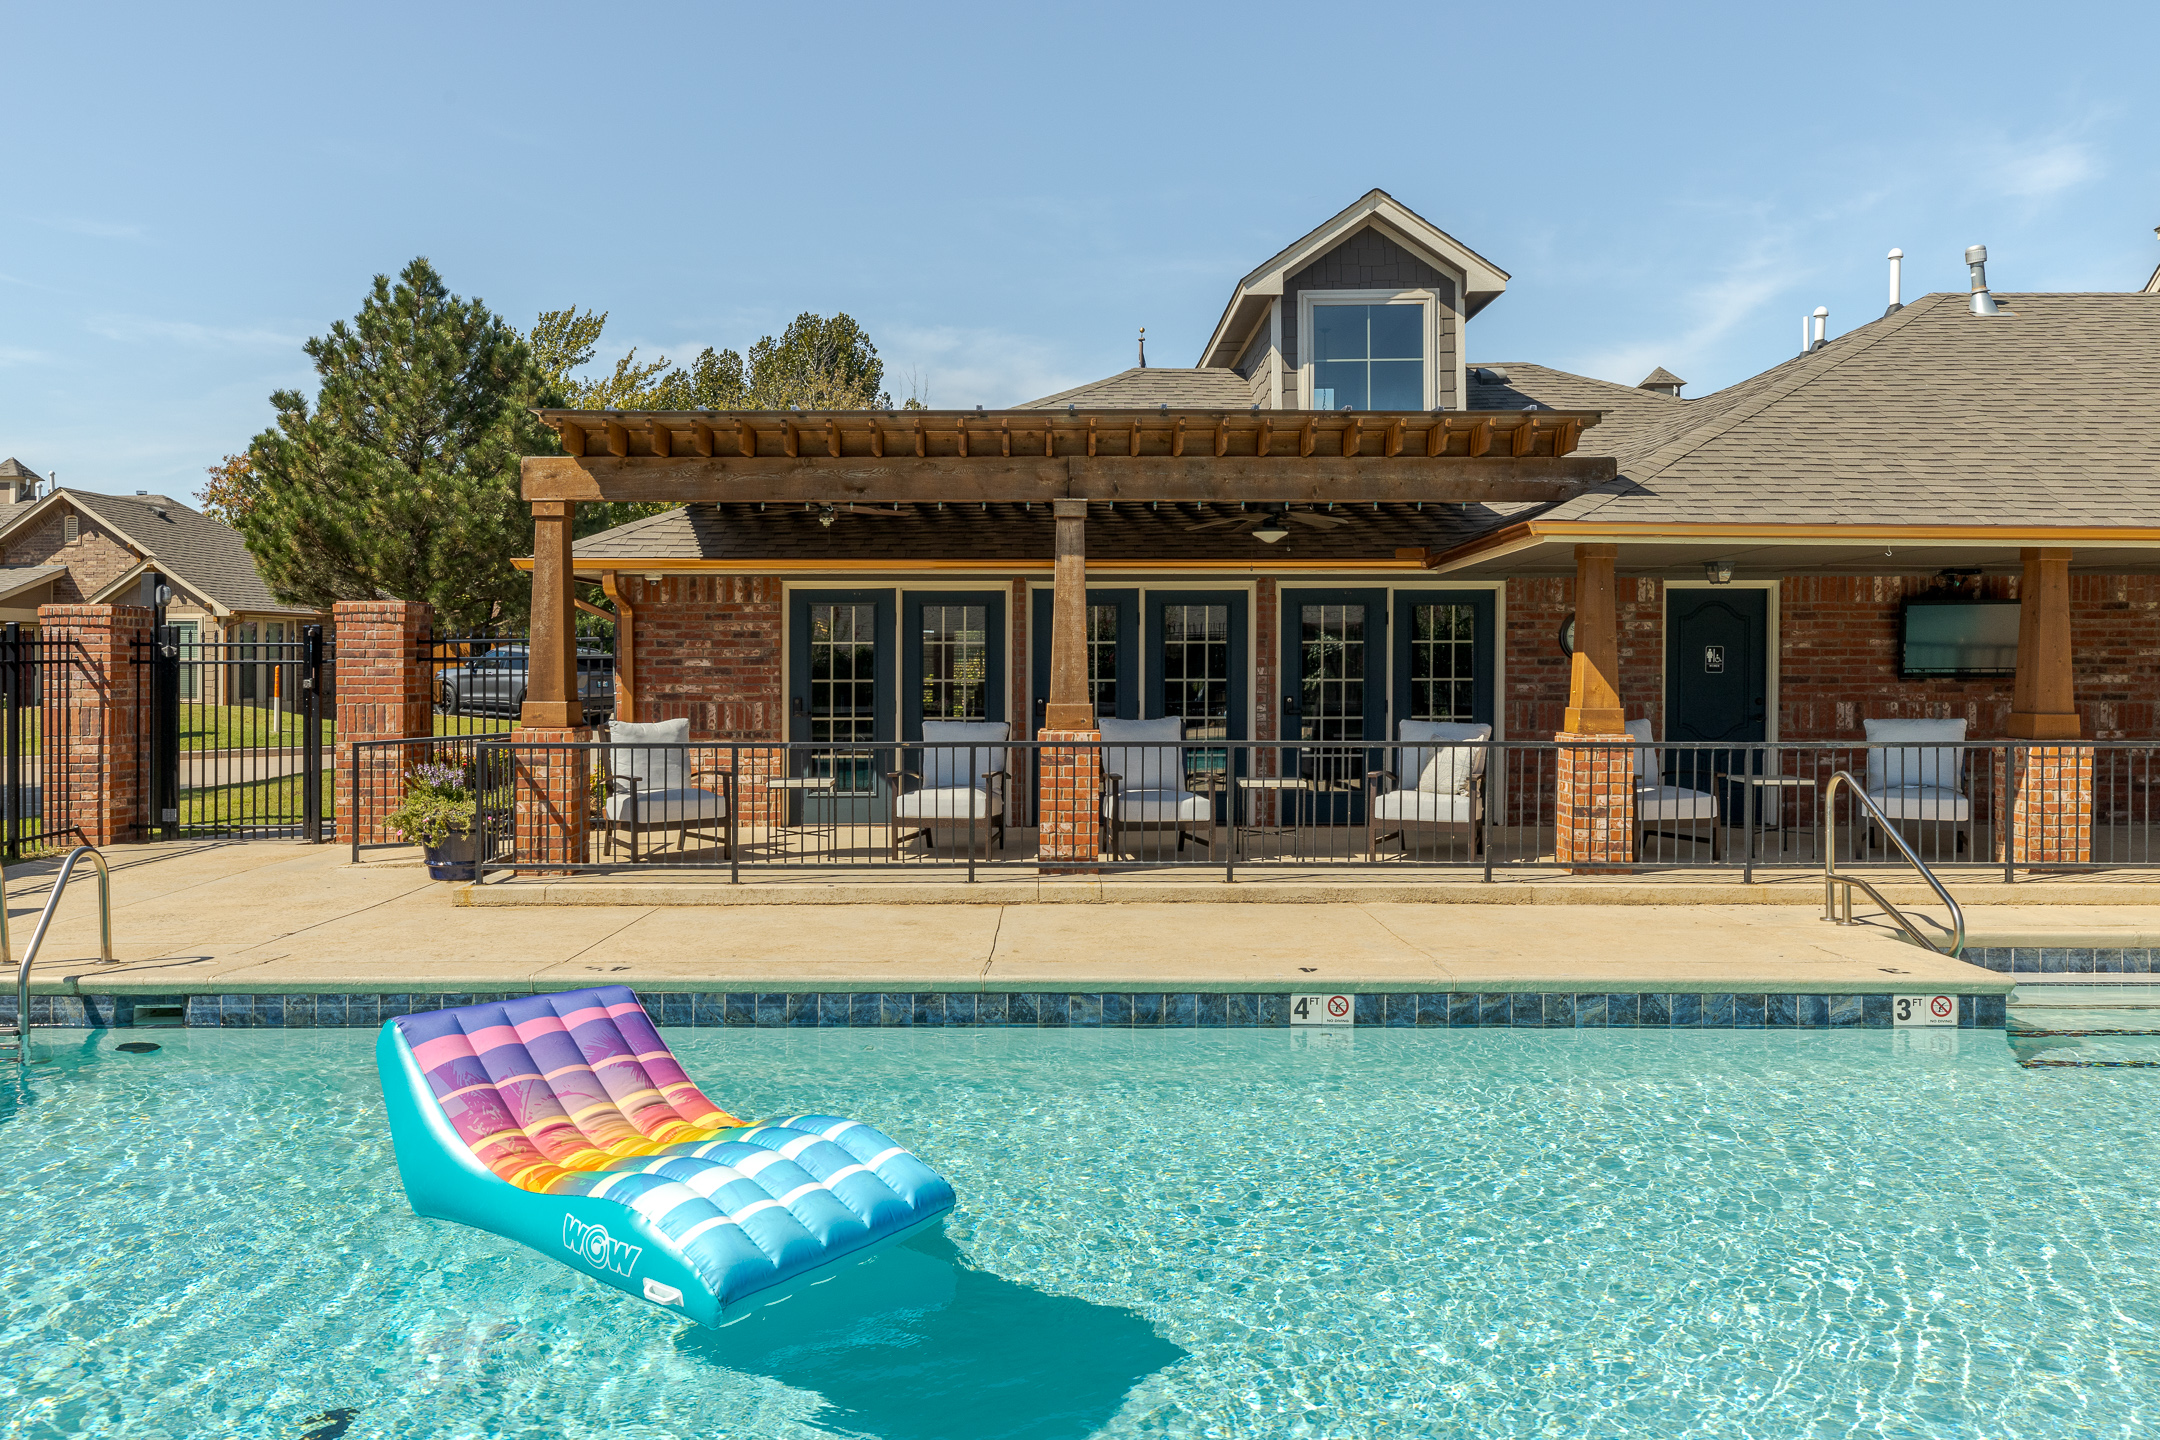 A floatie is seen floating on the turquoise waters of the pool in Laurel Springs senior living community in Oklahoma.